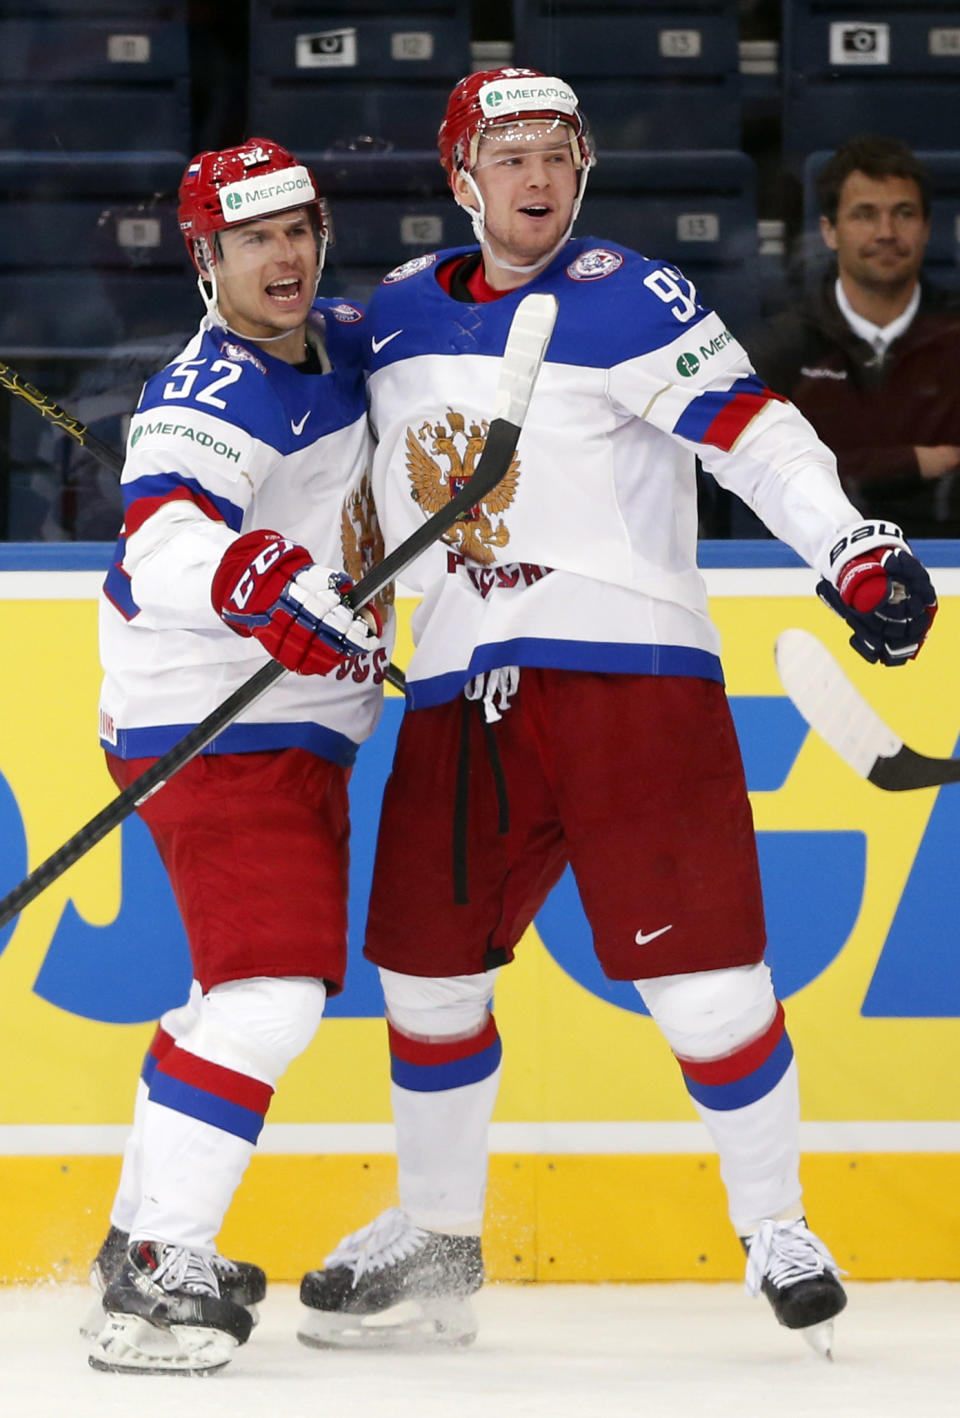 Russia's Sergei Shirokov, left and Yevgeni Kuznetzov celebrate their goal during the Group B preliminary round match between Switzerland and Russia at the Ice Hockey World Championship in Minsk, Belarus, Friday, May 9, 2014. (AP Photo/Darko Bandic)